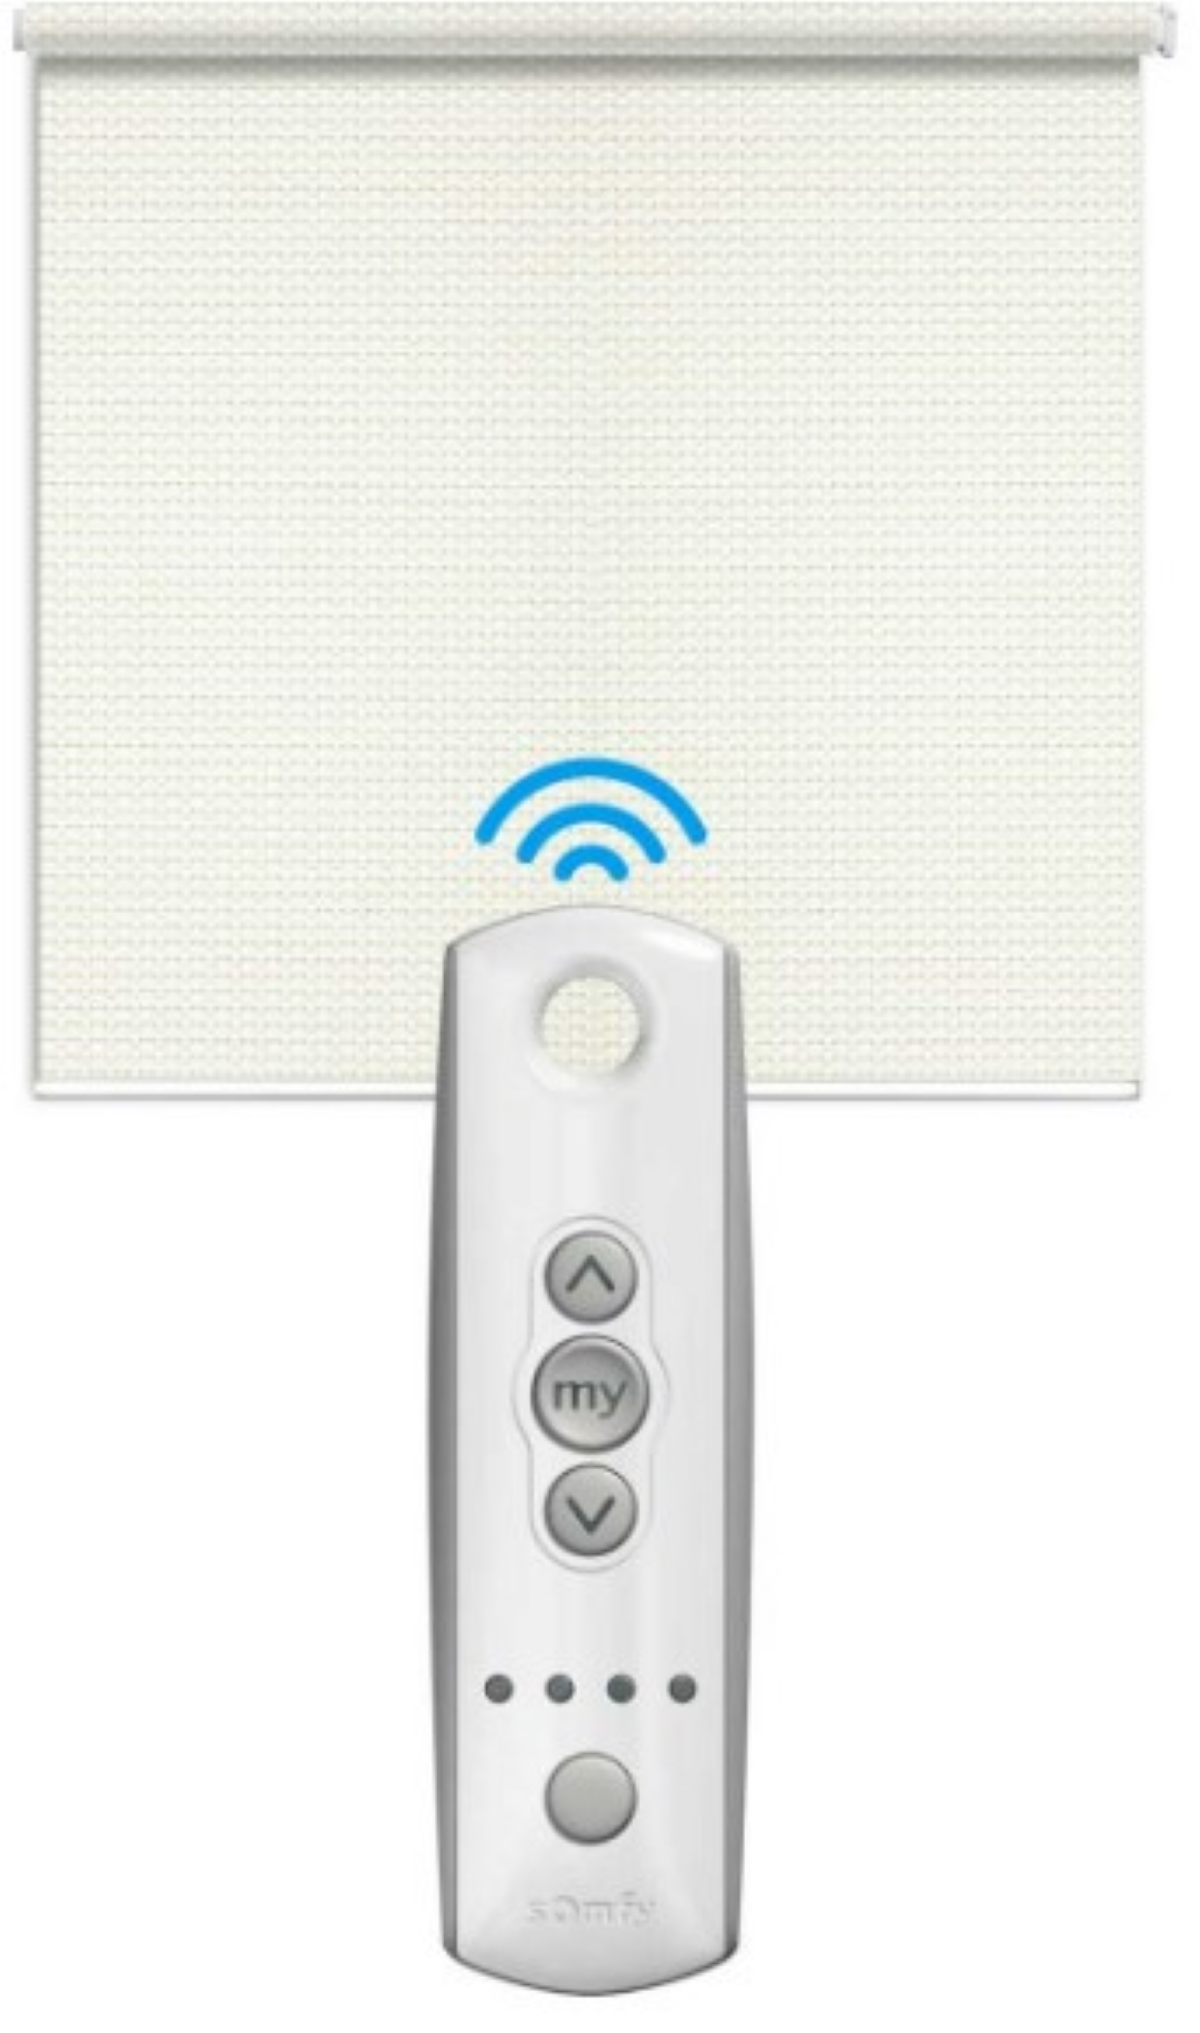 Somfy Telis 4 RTS Pure Remote, 5 Channel (1810633) - image 4 of 5